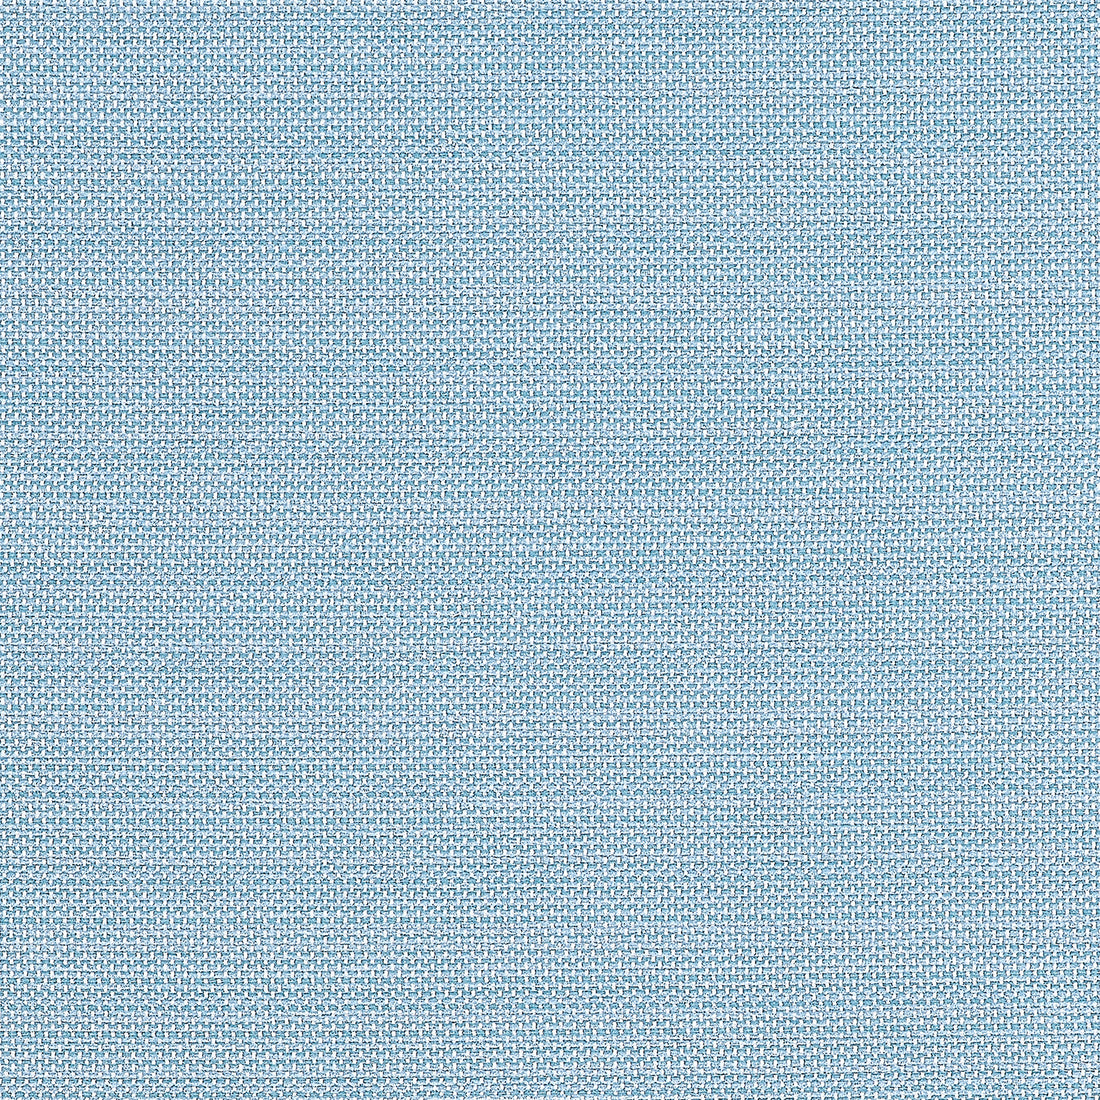 Cameron fabric in sky color - pattern number W81648 - by Thibaut in the Locale collection